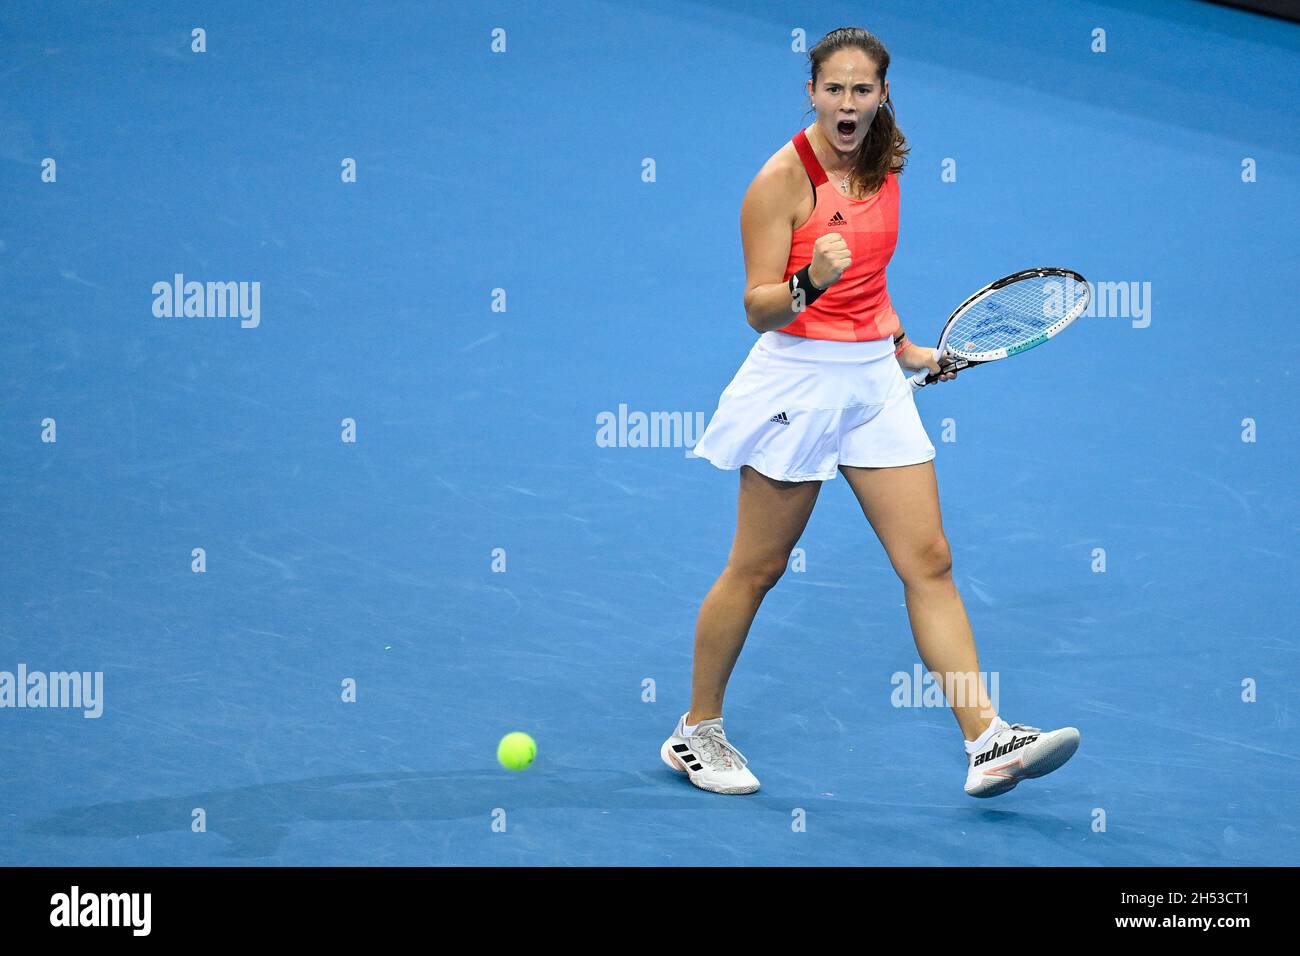 Prague, Czech Republic. 06th Nov, 2021. Daria Kasatkina of Russia in action  during the final match of the women's tennis Billie Jean King Cup (former  Fed Cup) against Jil Teichmannin of Switzerland